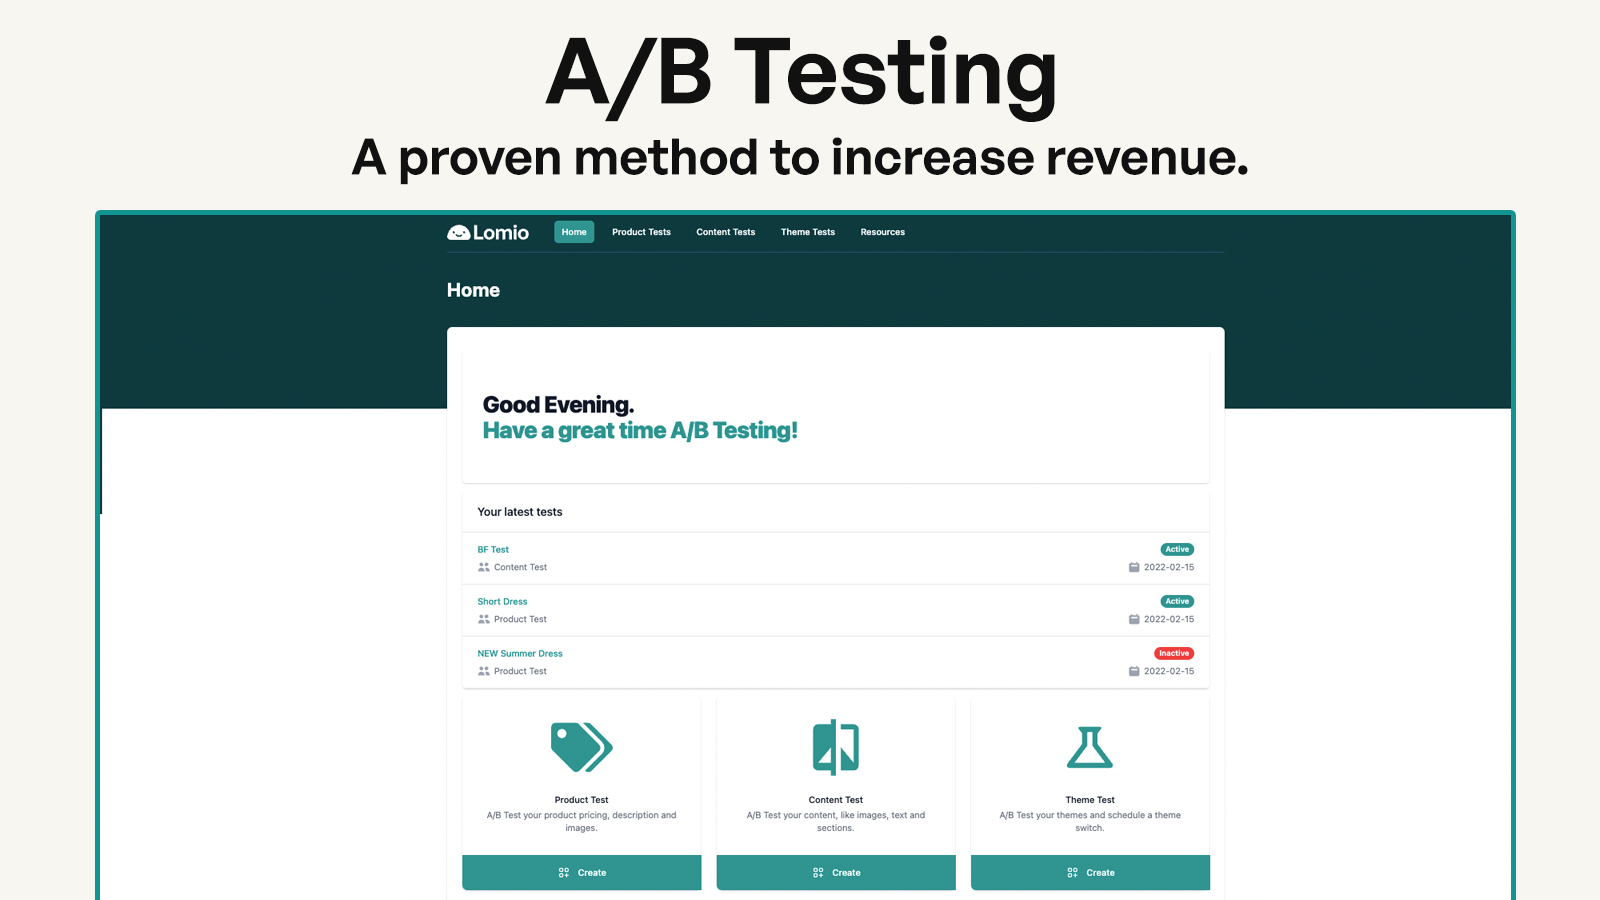 A/B Testing a proven method to increase revenue